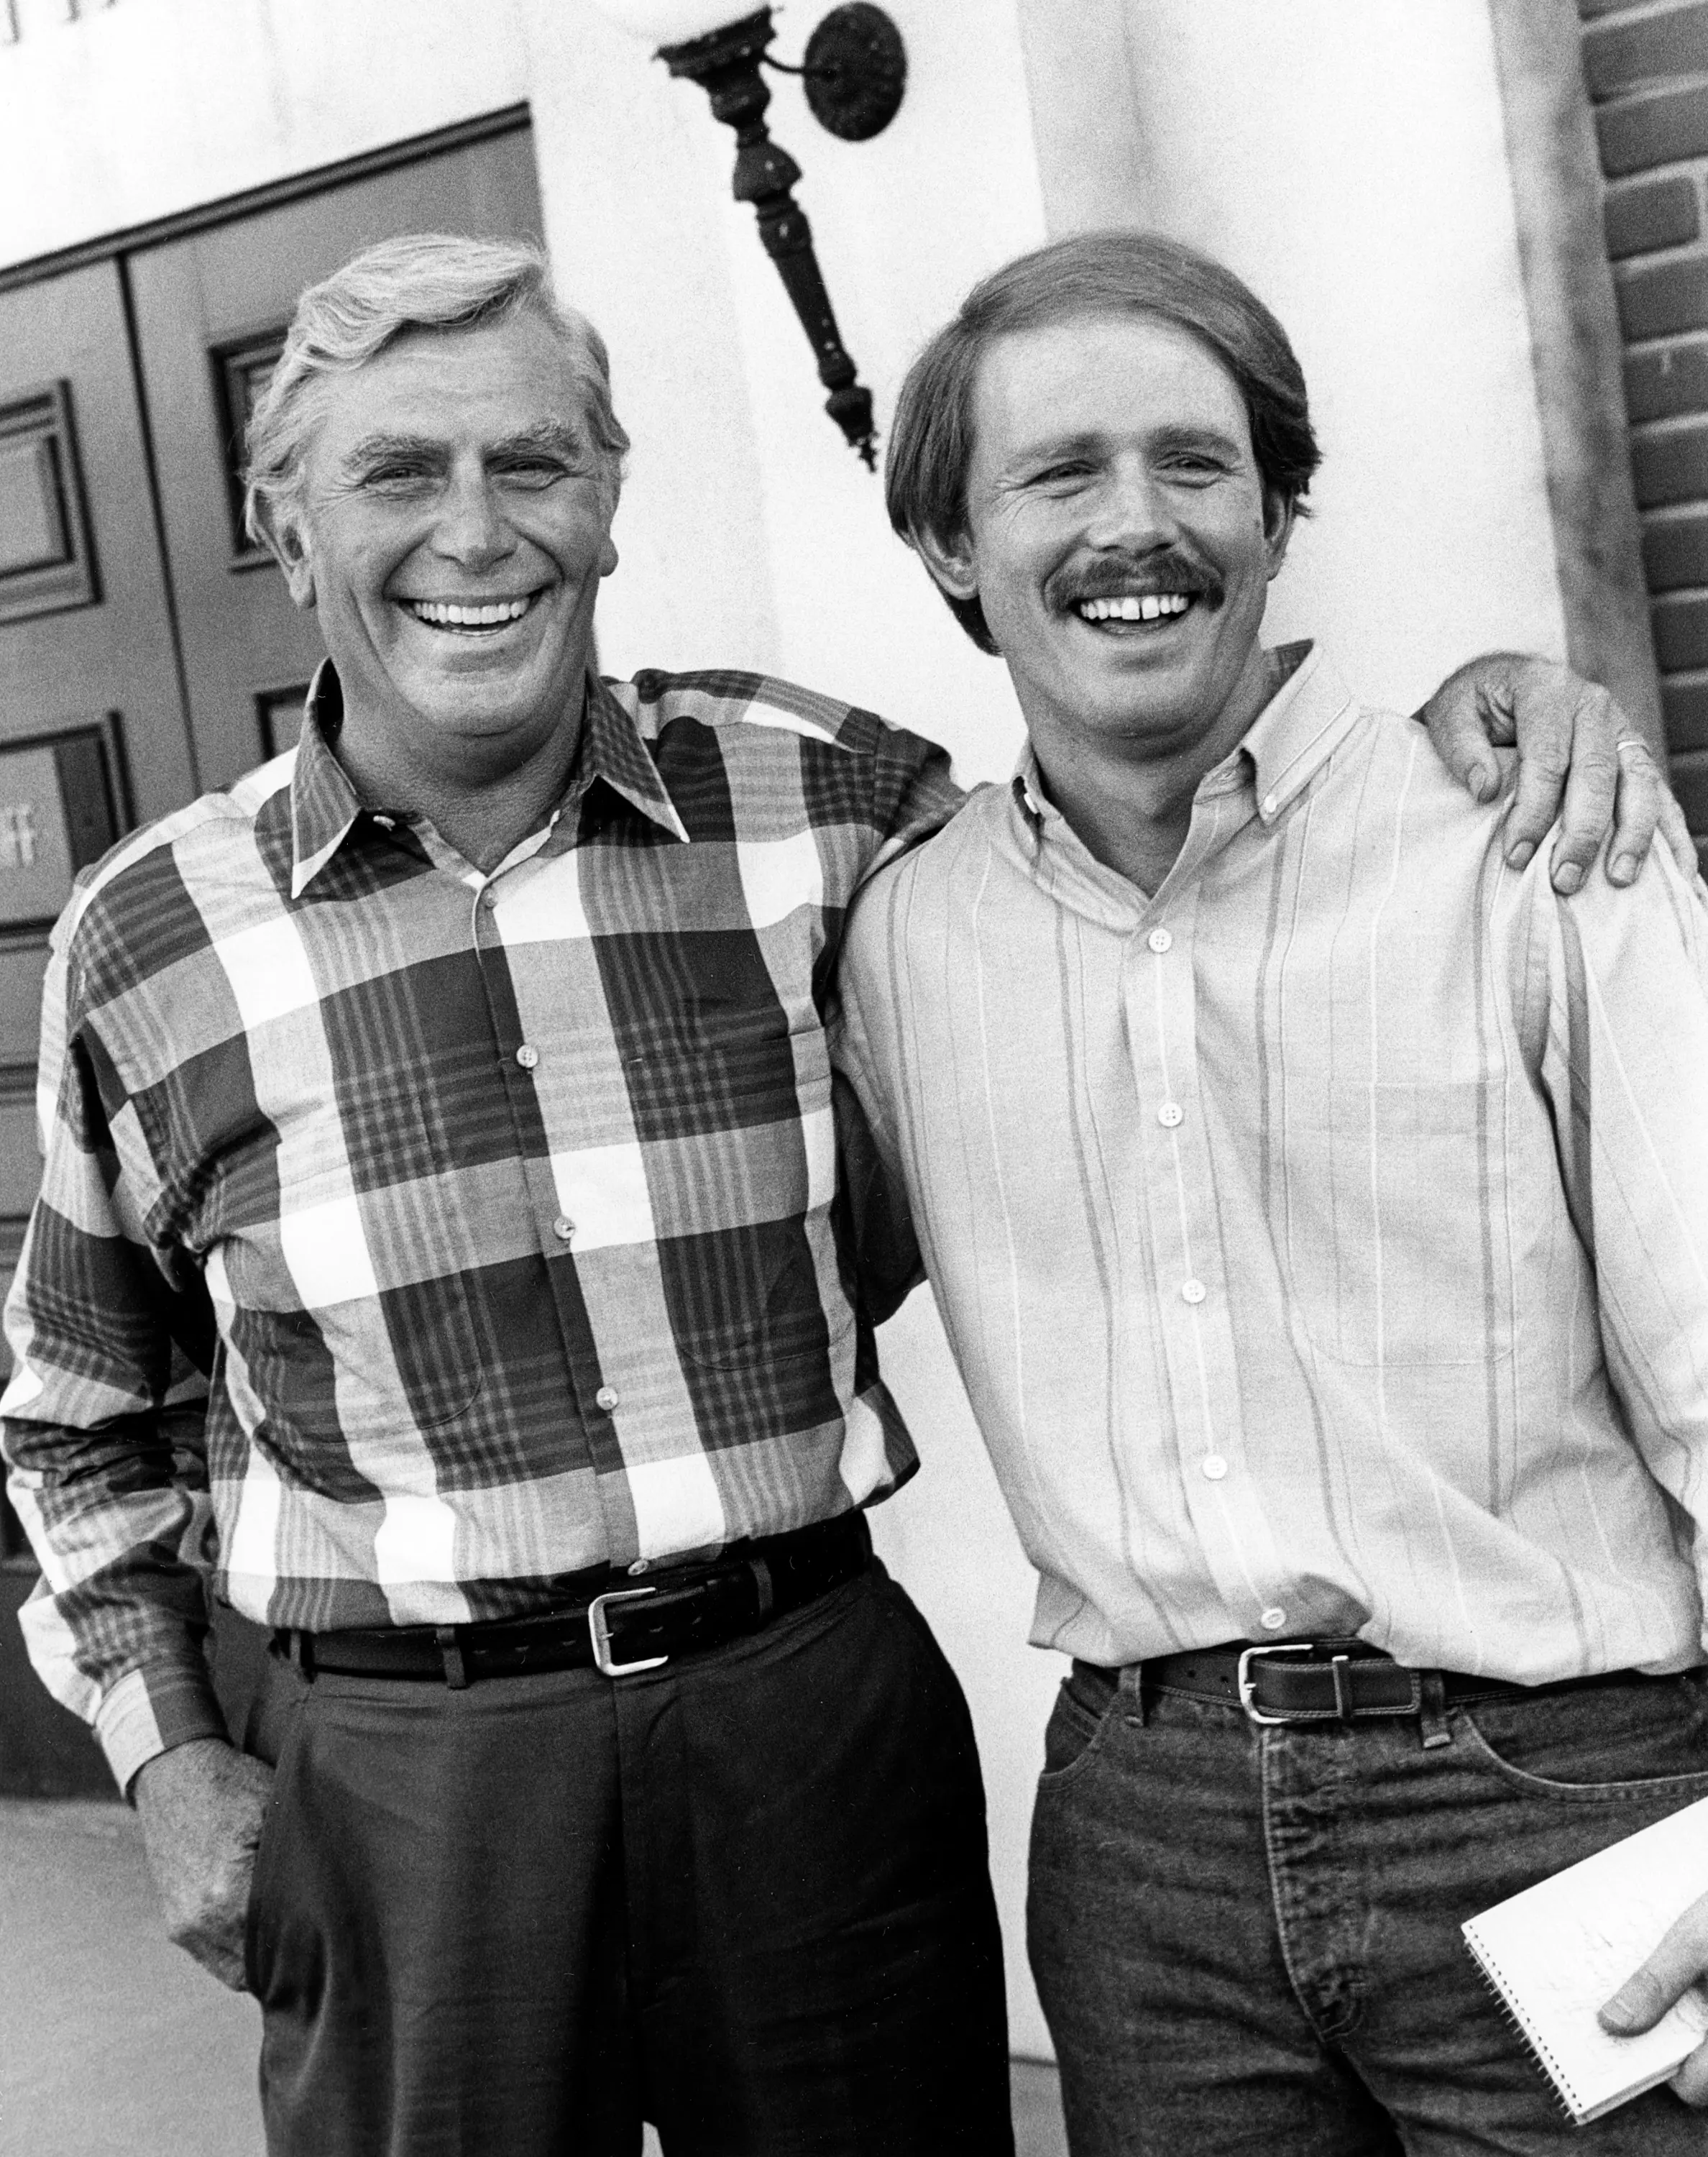 RETURN TO MAYBERRY, from left: Andy Griffith, Ron Howard, 1986